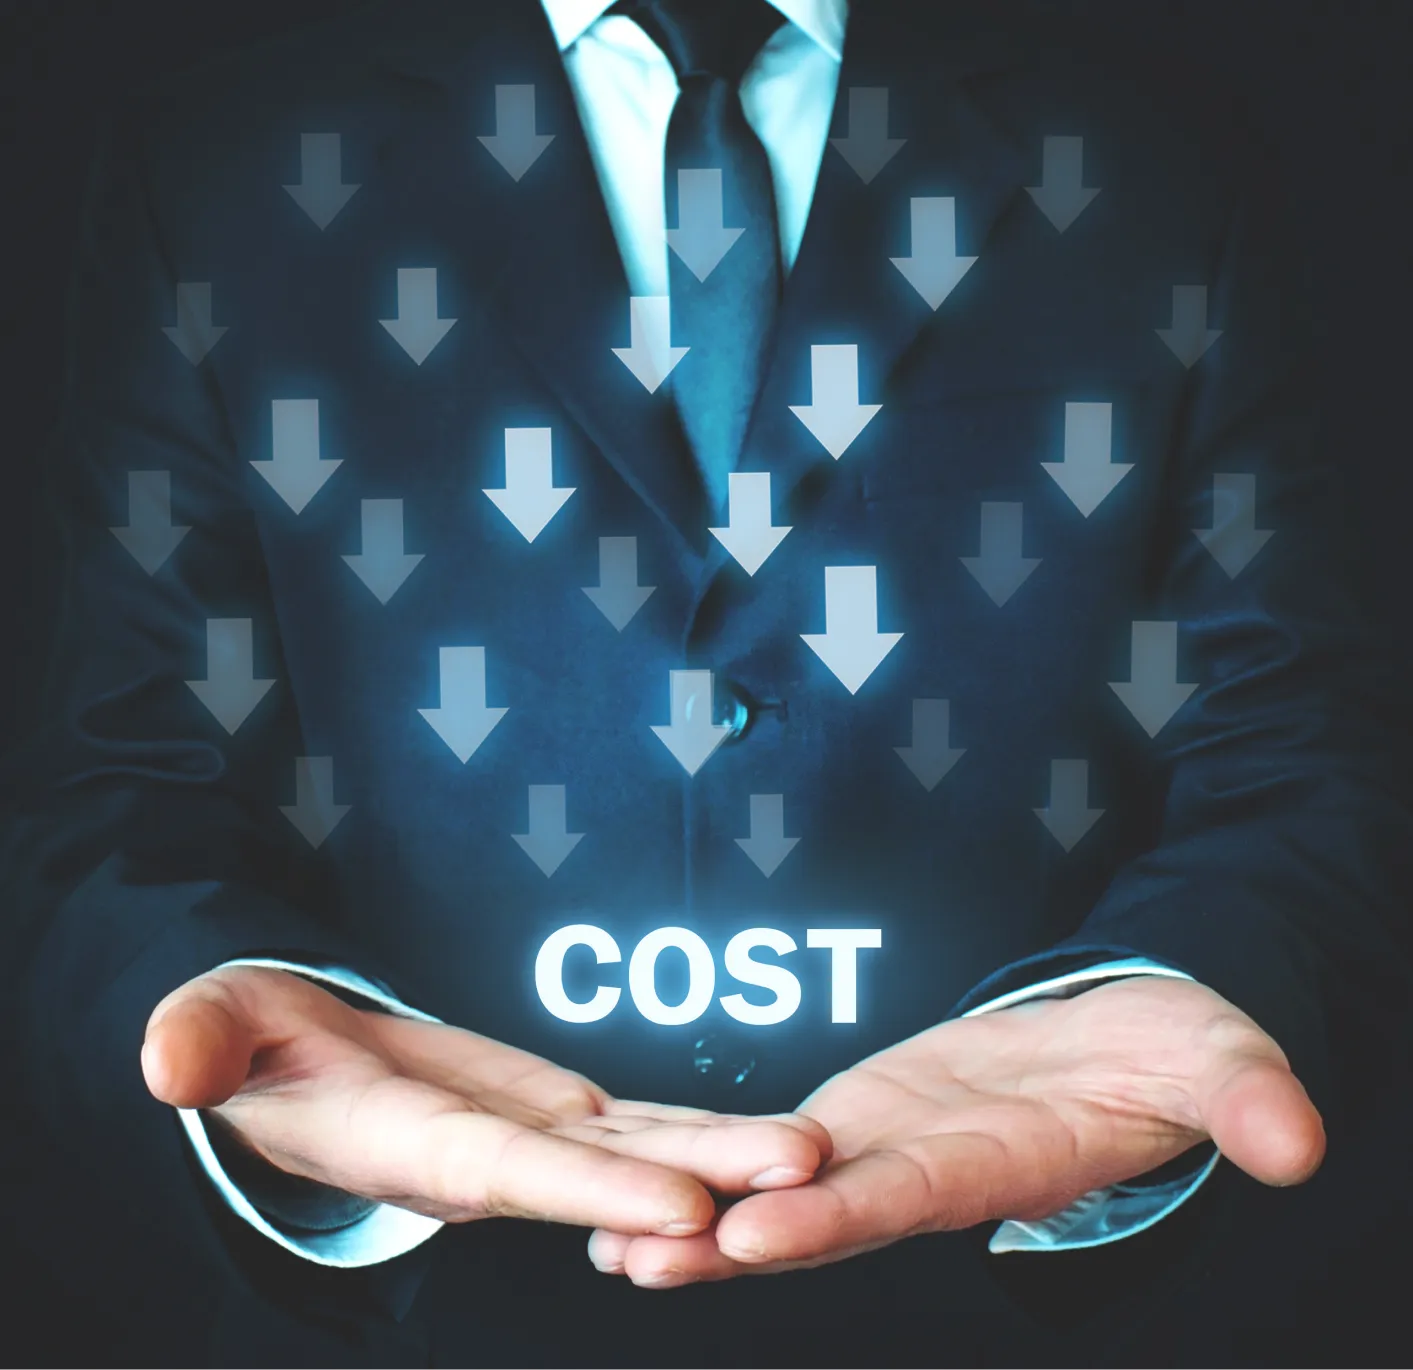 Businessman with downward arrows illustrating cost reduction.